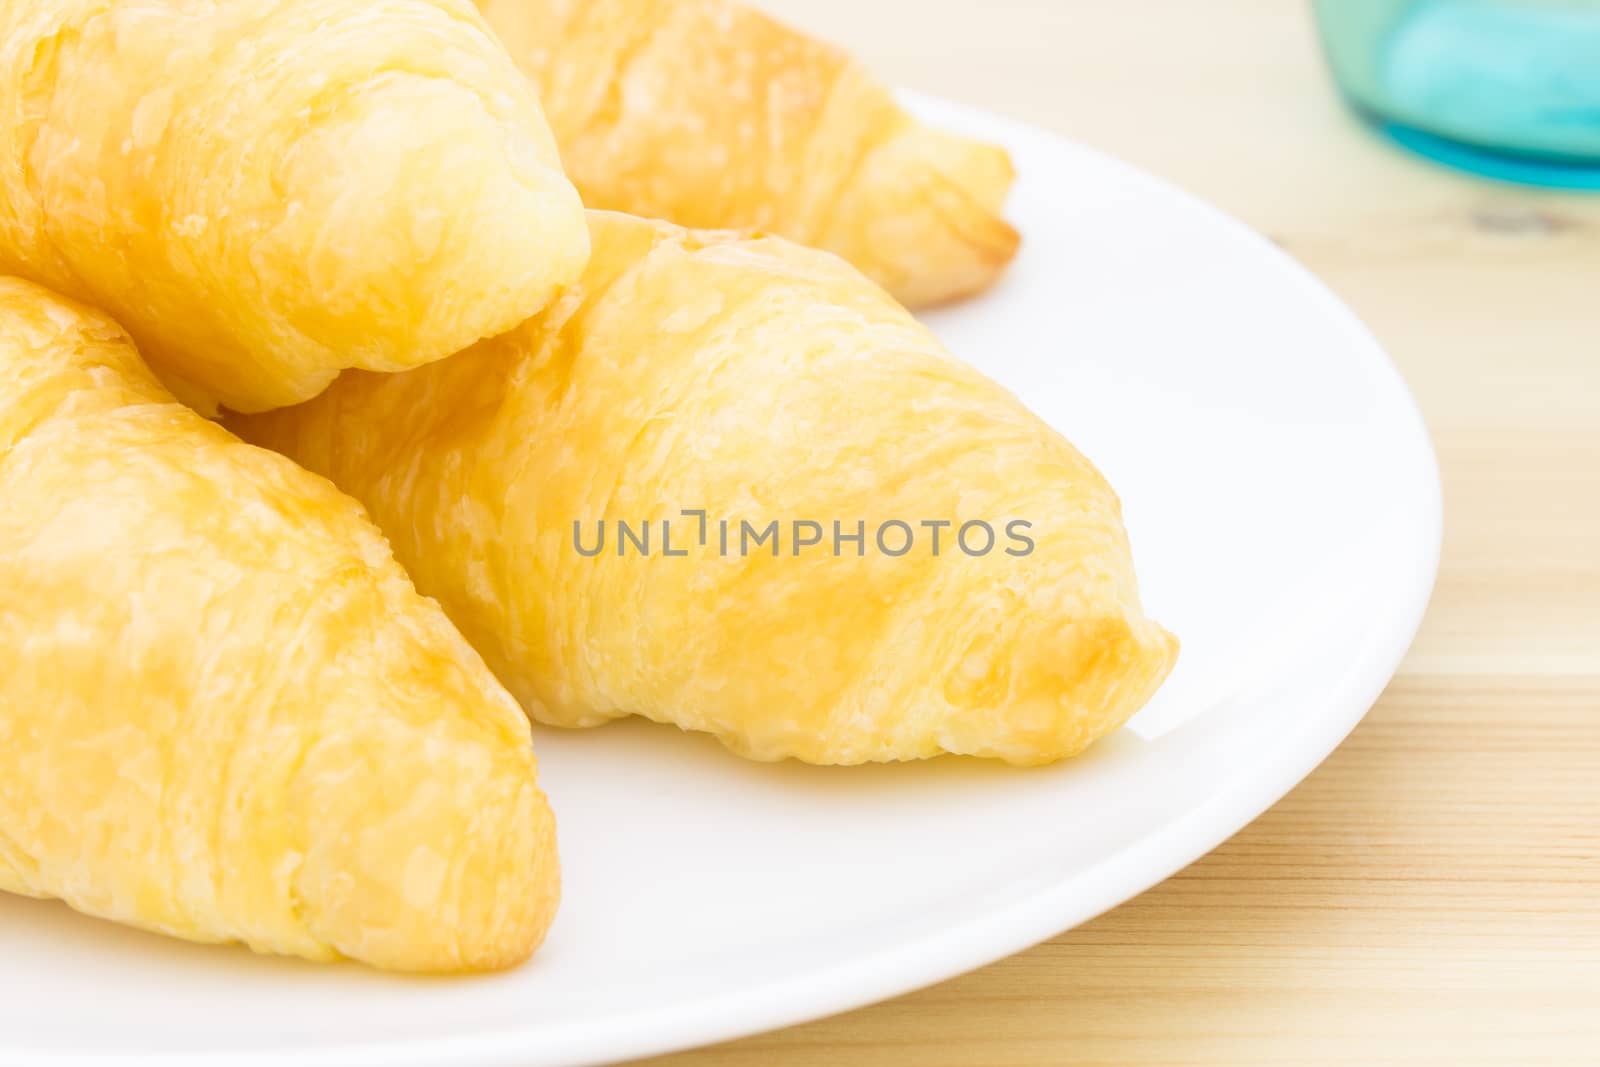 Croissant or bread or bakery on white dish on wood table and glass close up view